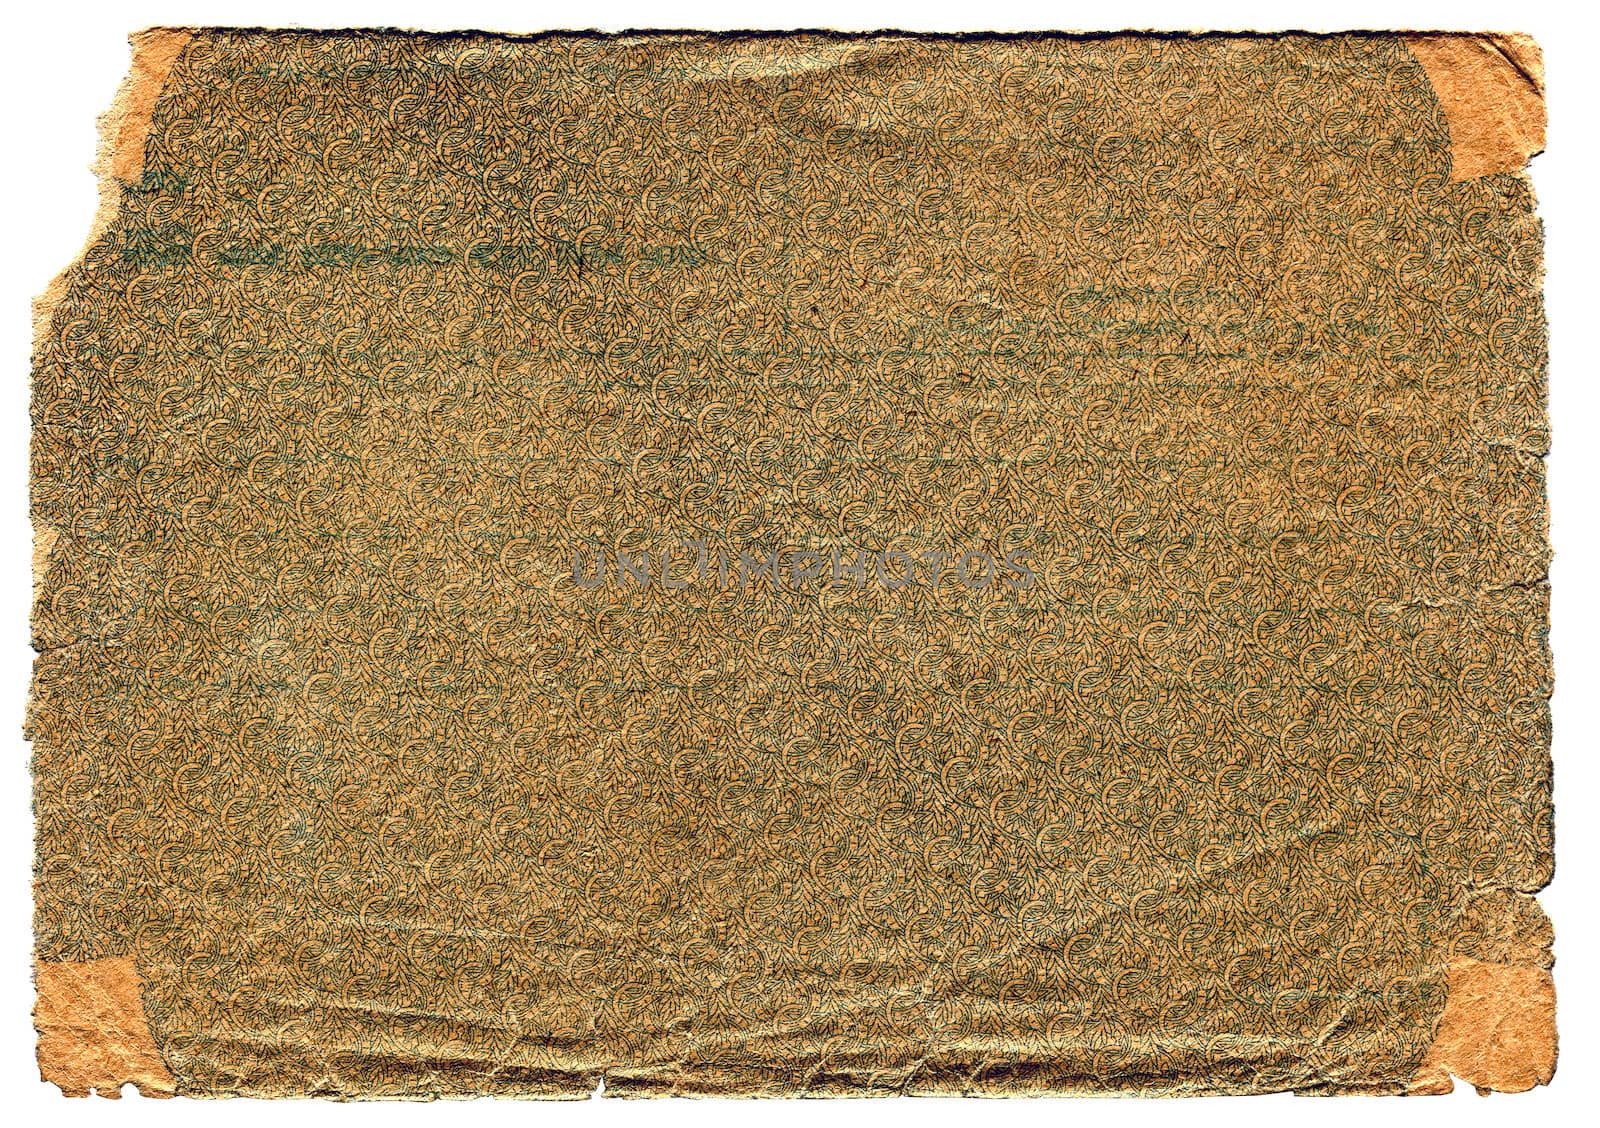 old textured paper by sabphoto